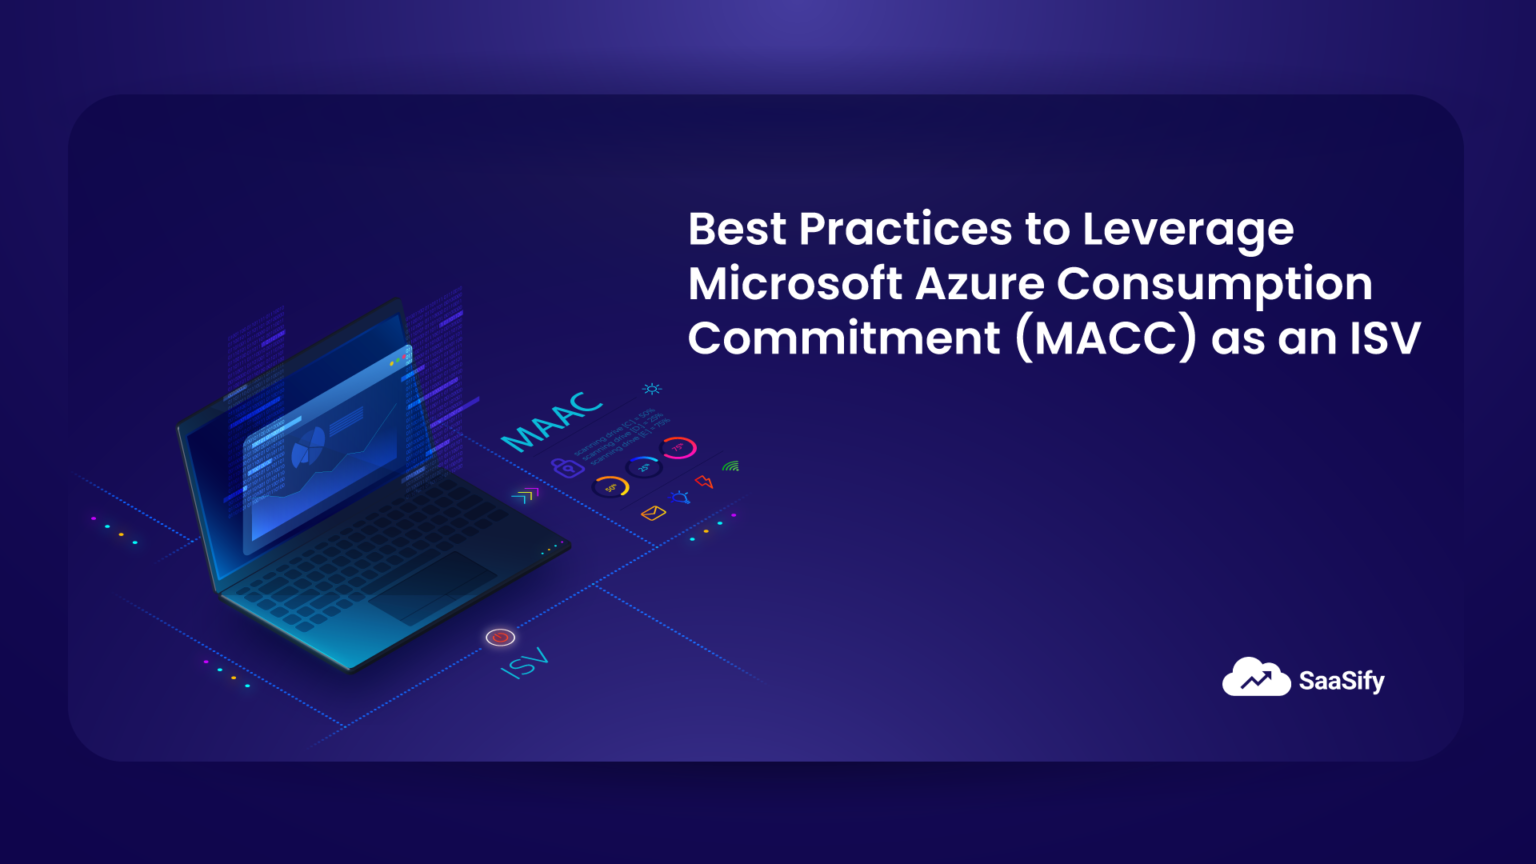 3 Best Practices to Leverage Microsoft Azure Consumption Commitment (MACC) as an ISV